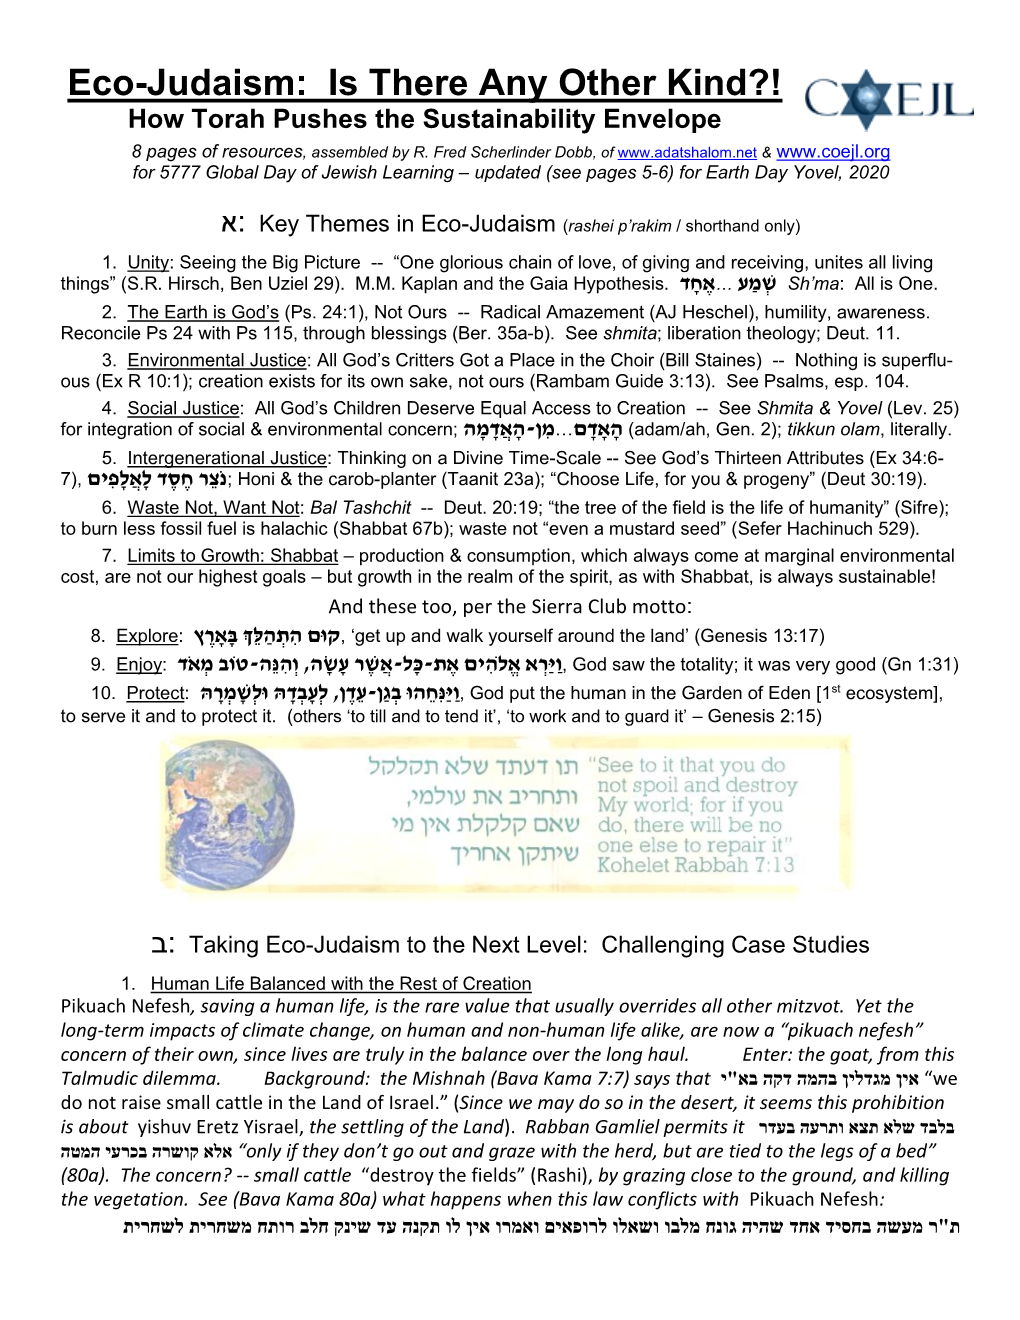 Eco-Judaism: Is There Any Other Kind?! How Torah Pushes the Sustainability Envelope 8 Pages of Resources, Assembled by R